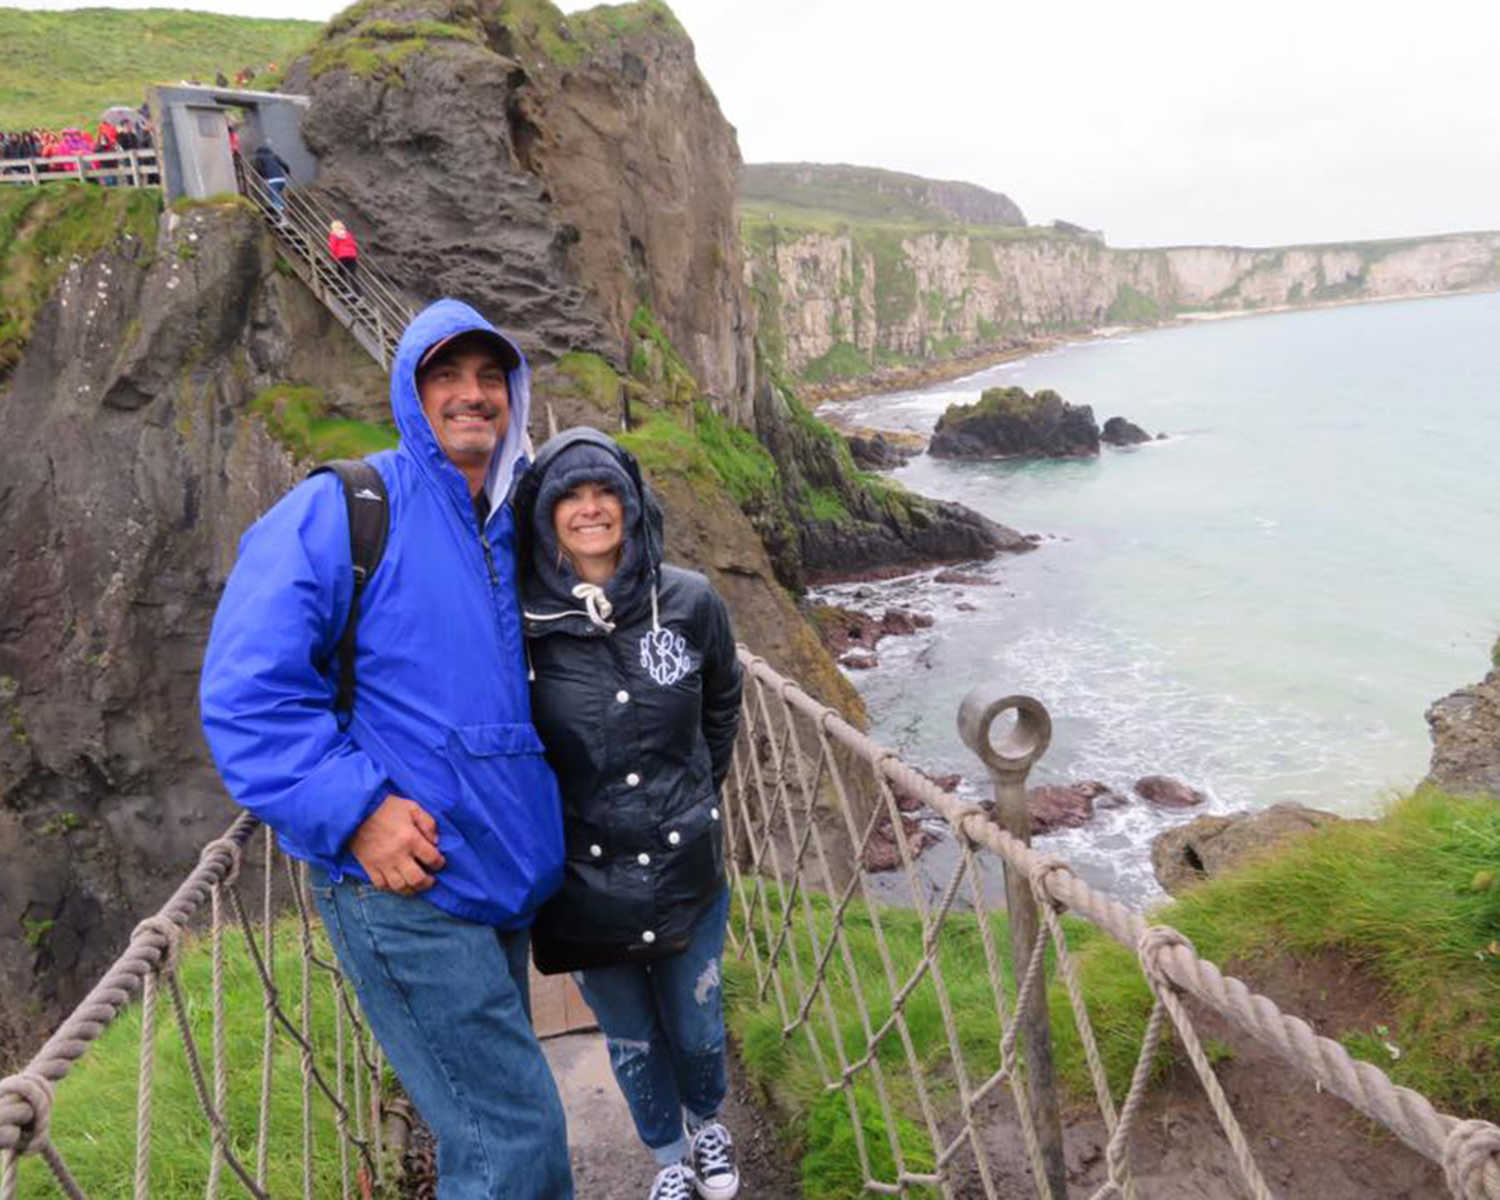 husband and wife in raincoats on a roped bridge crossing over a body of water on a cliff